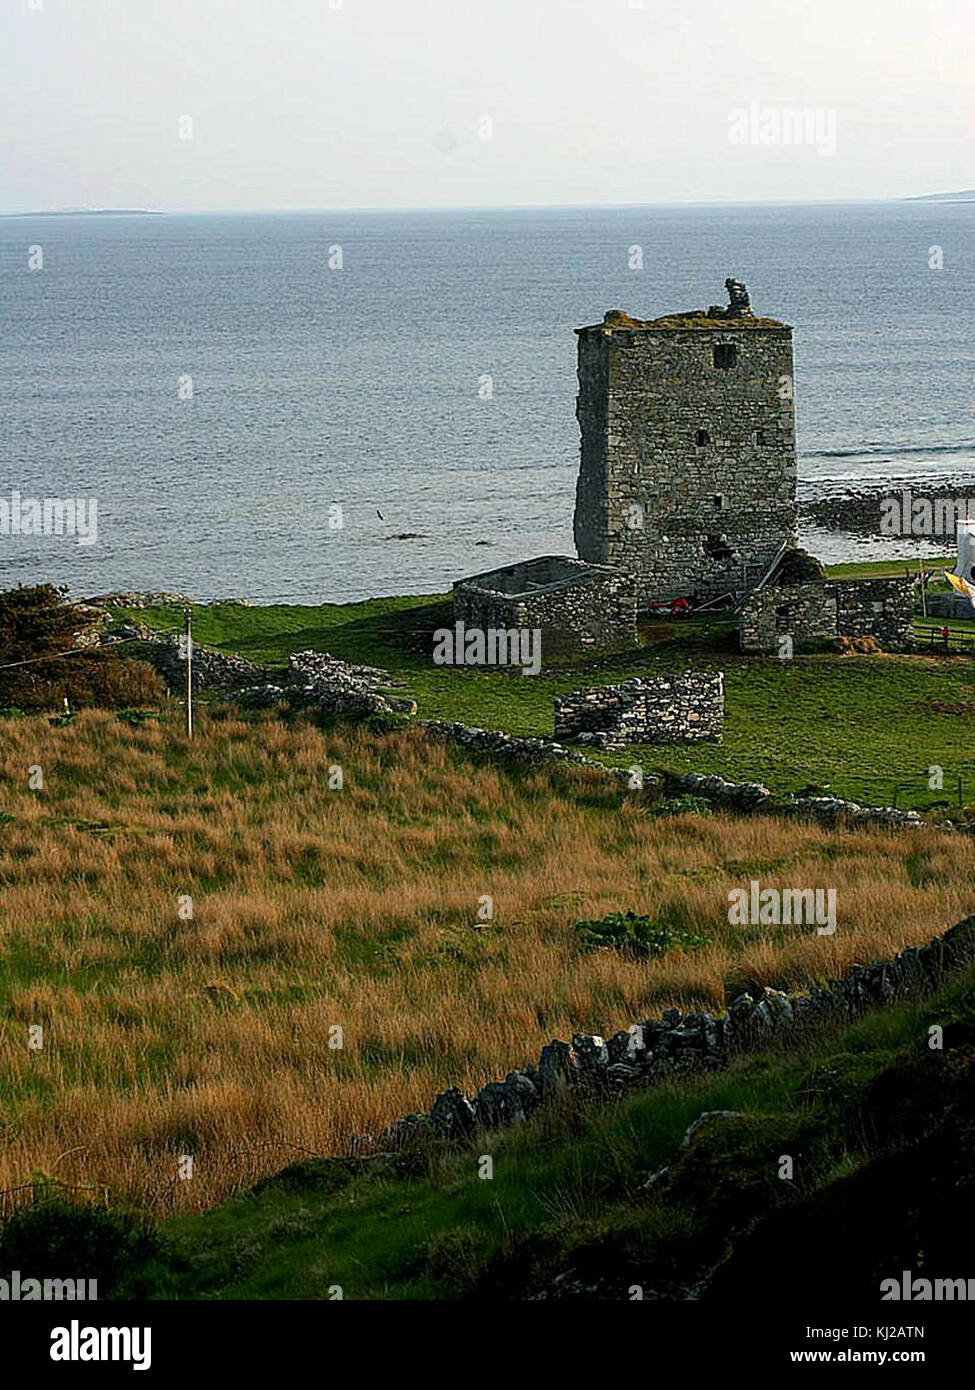 Renvyle castle in county galway ireland near tully cross Stock Photo